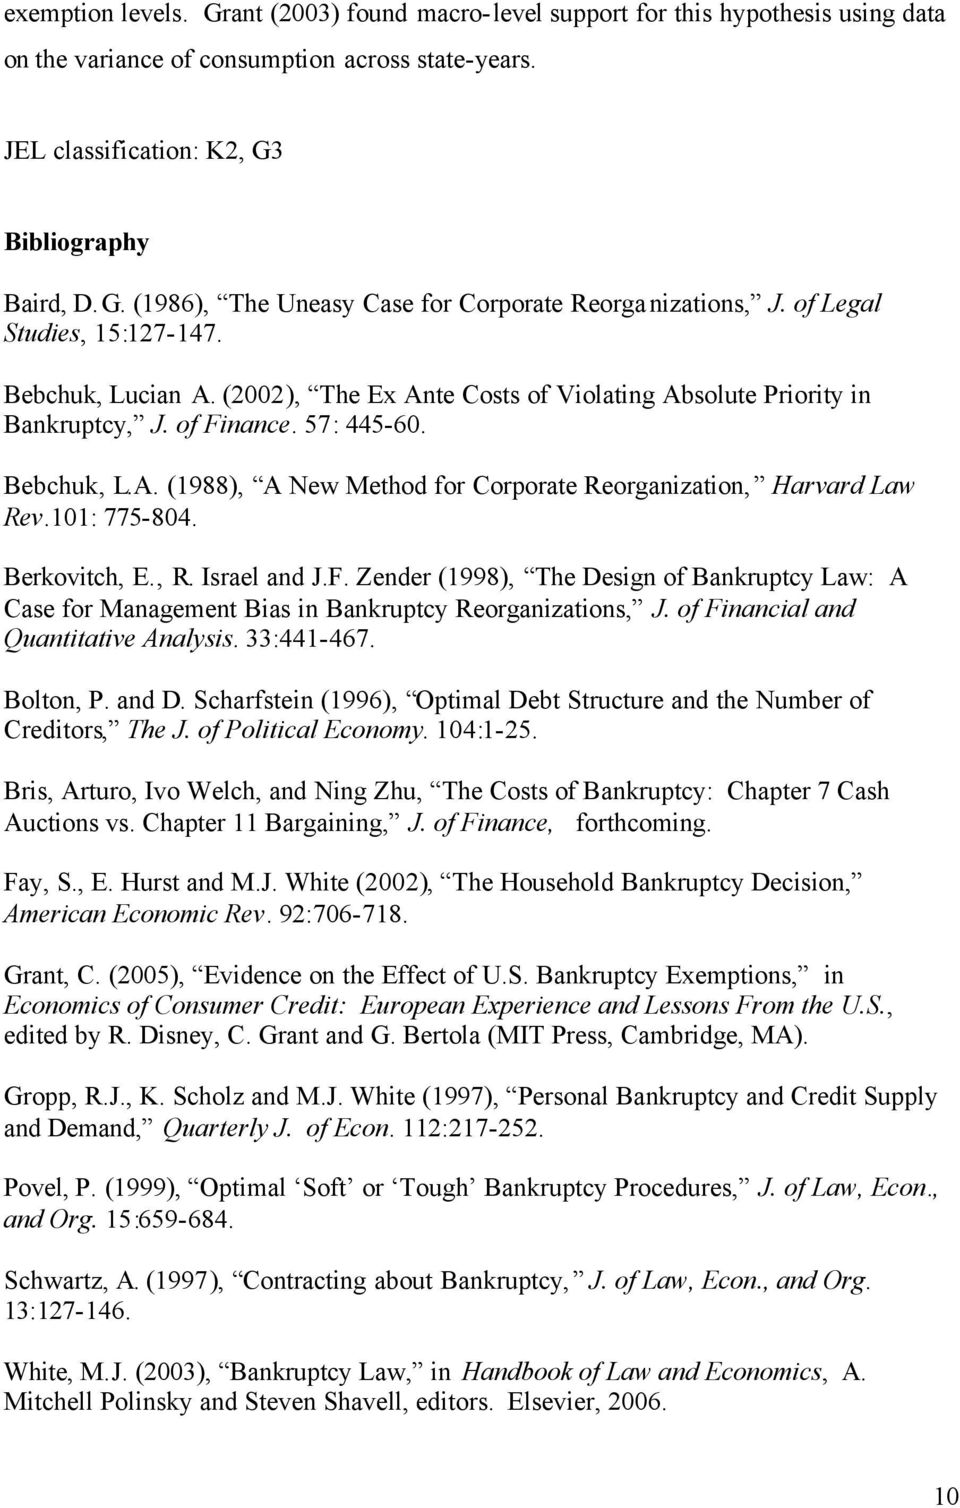 101: 775-804. Berkovitch, E., R. Israel and J.F. Zender (1998), The Design of Bankruptcy Law: A Case for Management Bias in Bankruptcy Reorganizations, J. of Financial and Quantitative Analysis.